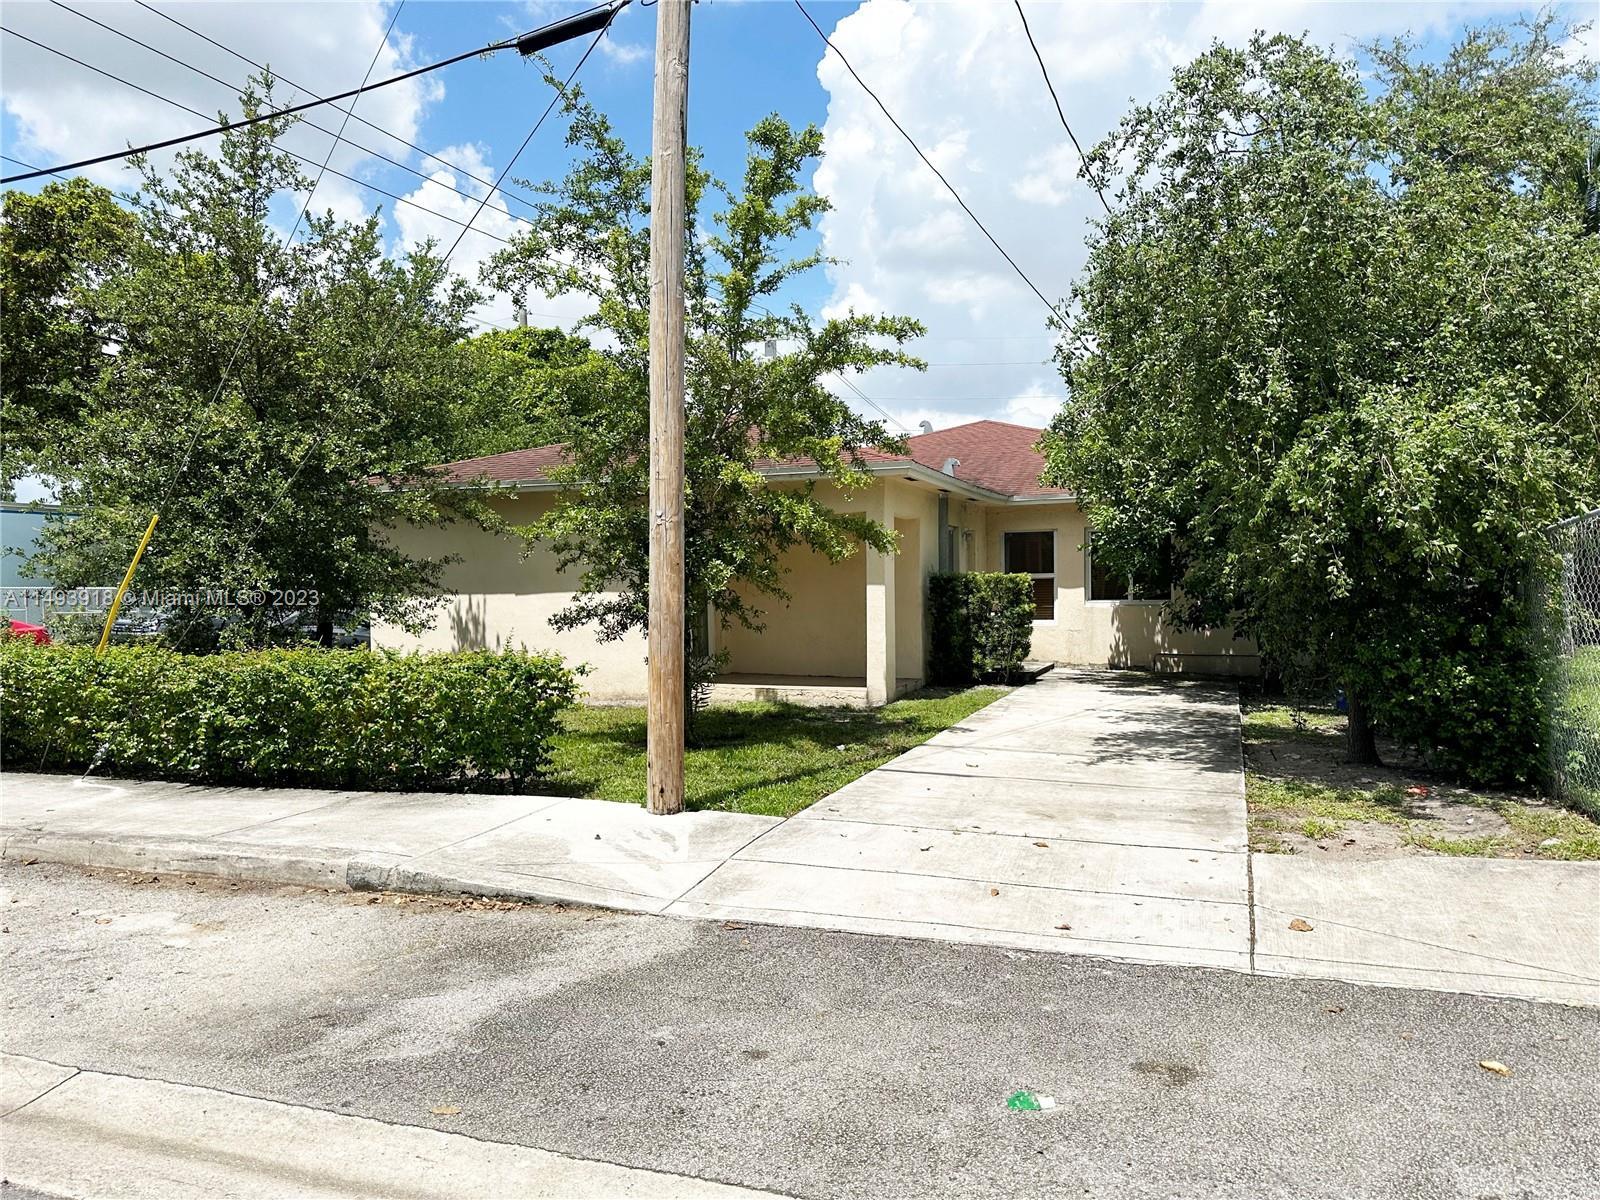 Photo of 515 NW 77th St in Miami, FL